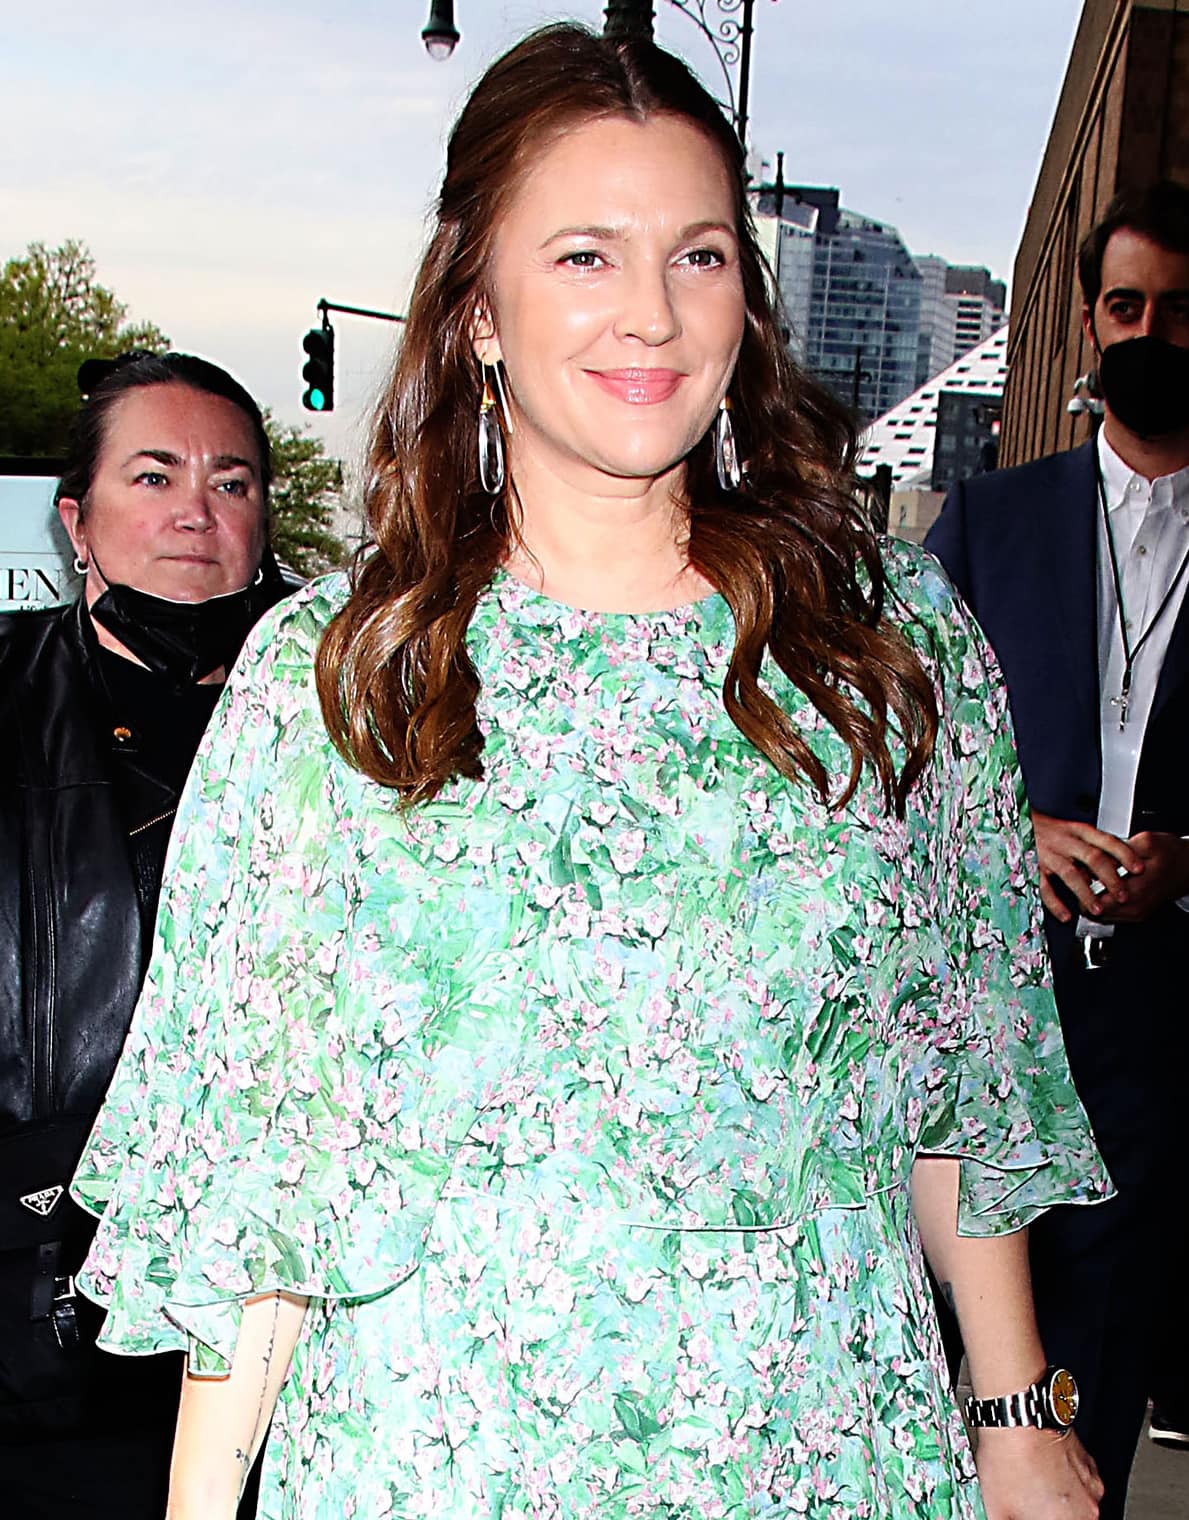 Drew Barrymore looks pretty with half-up wavy hairstyle and soft pink makeup